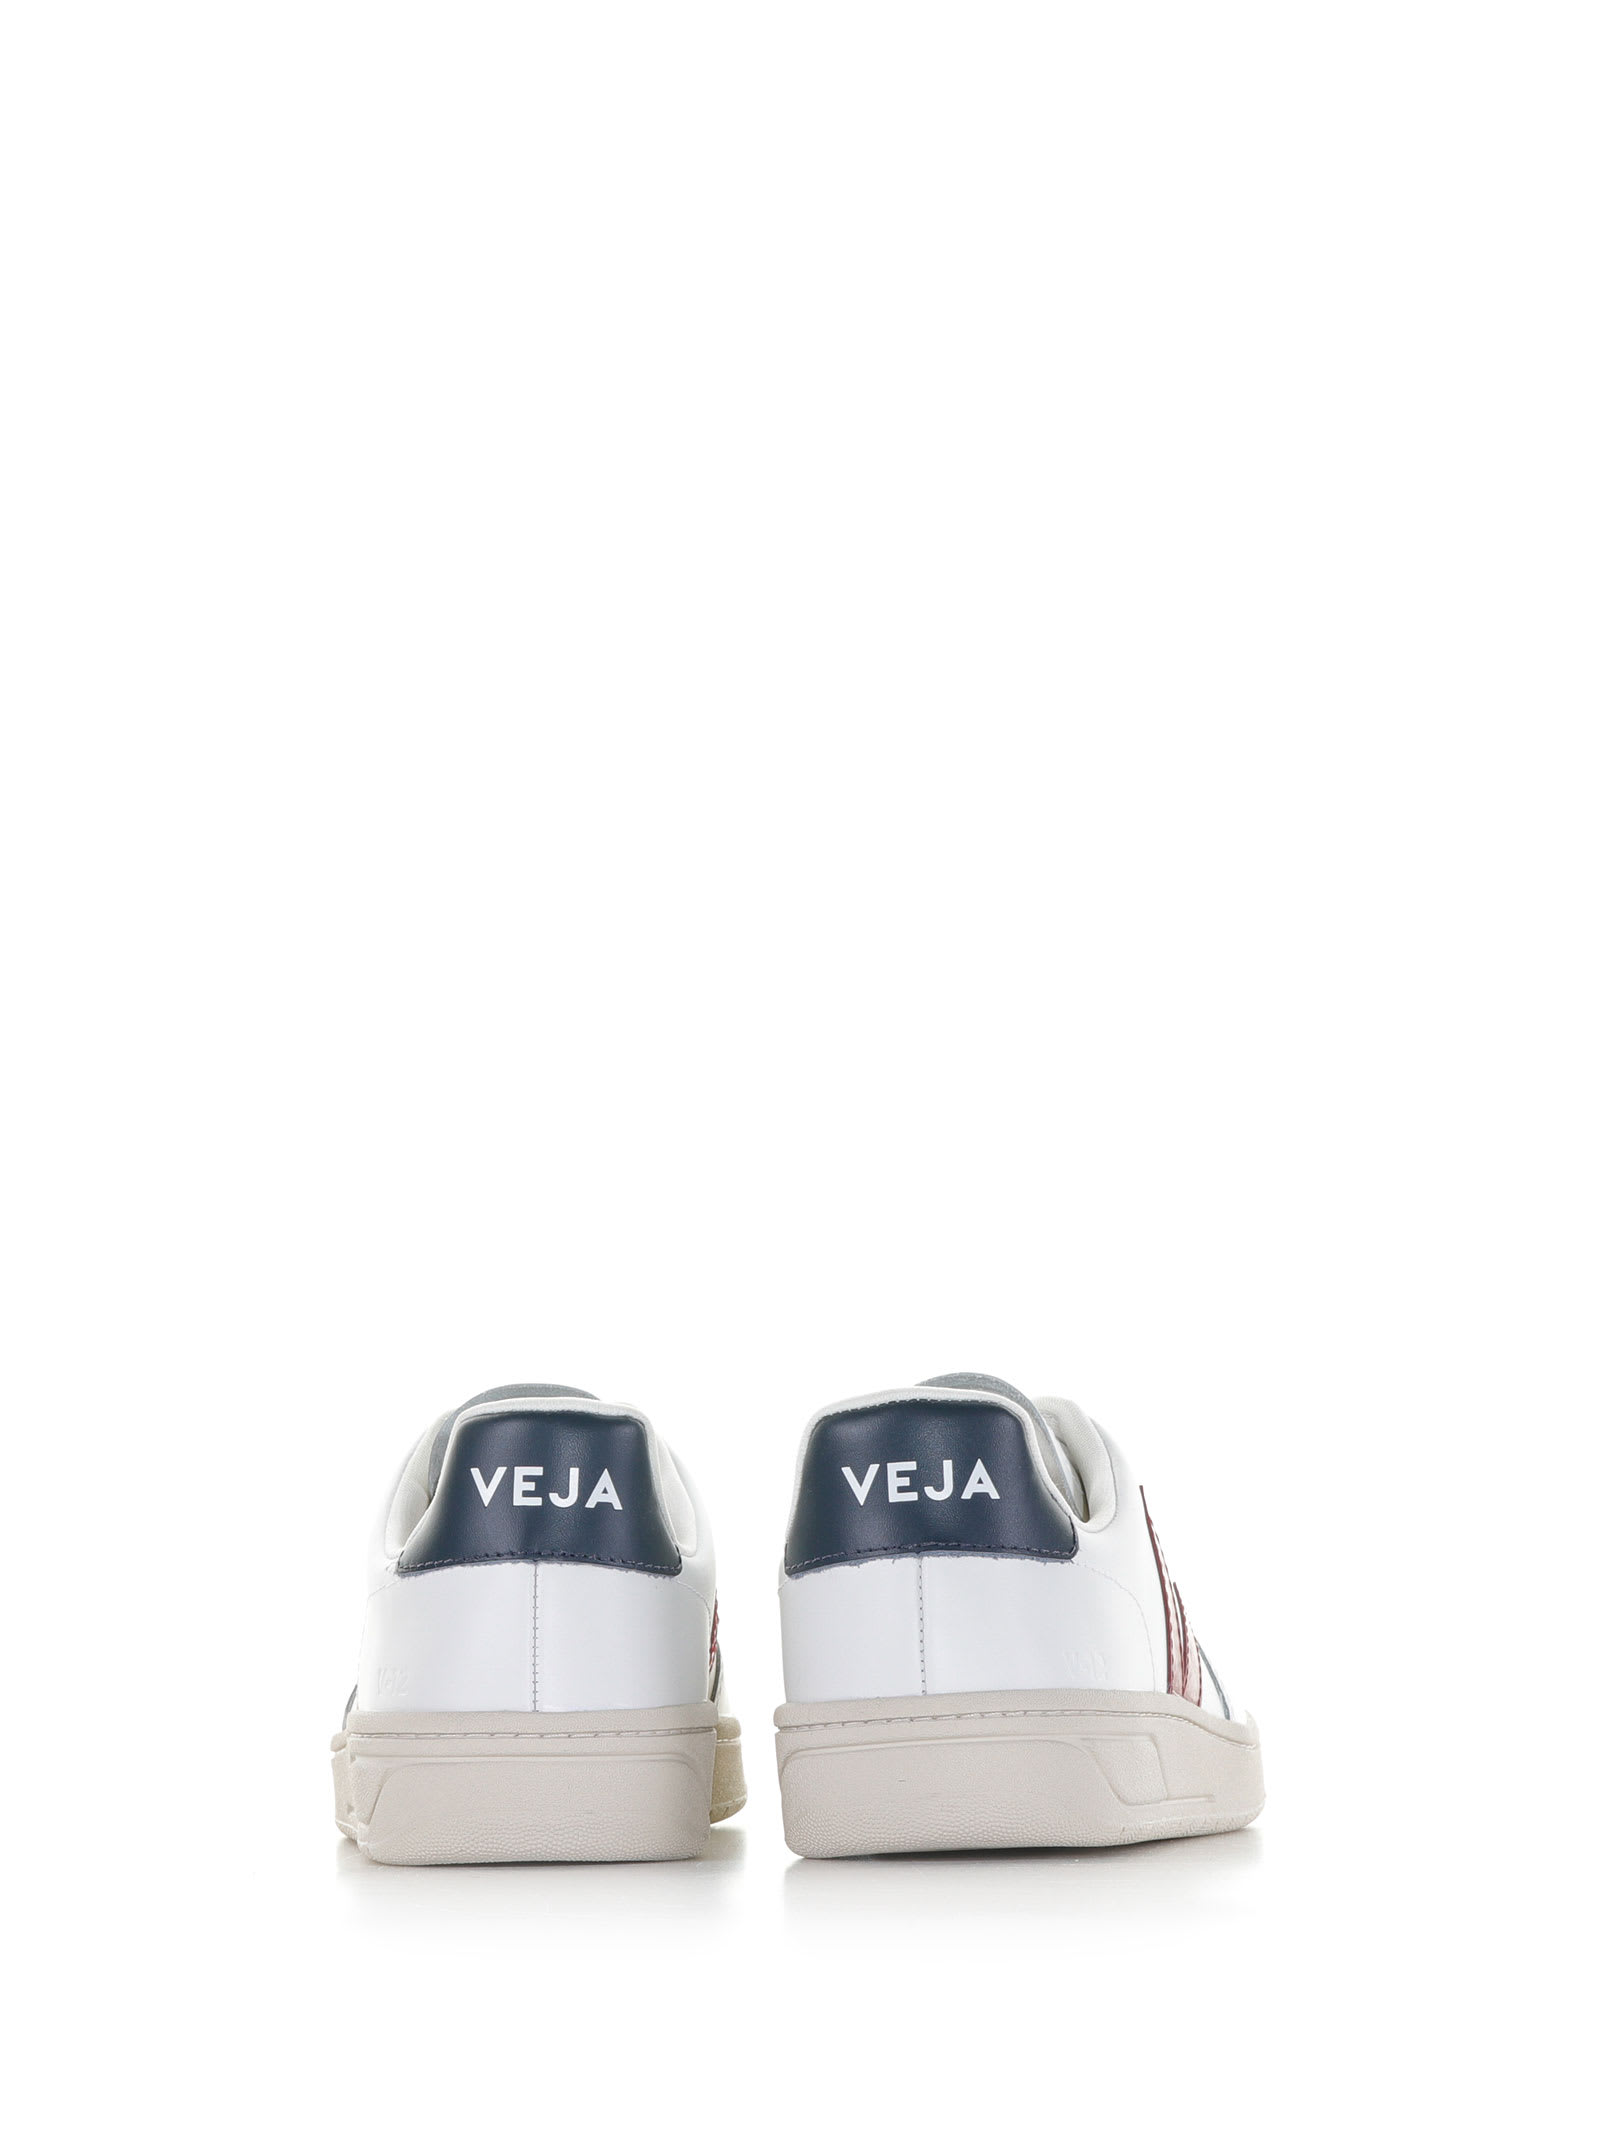 VEJA CAMPO TWO-TONE SNEAKER IN LEATHER 